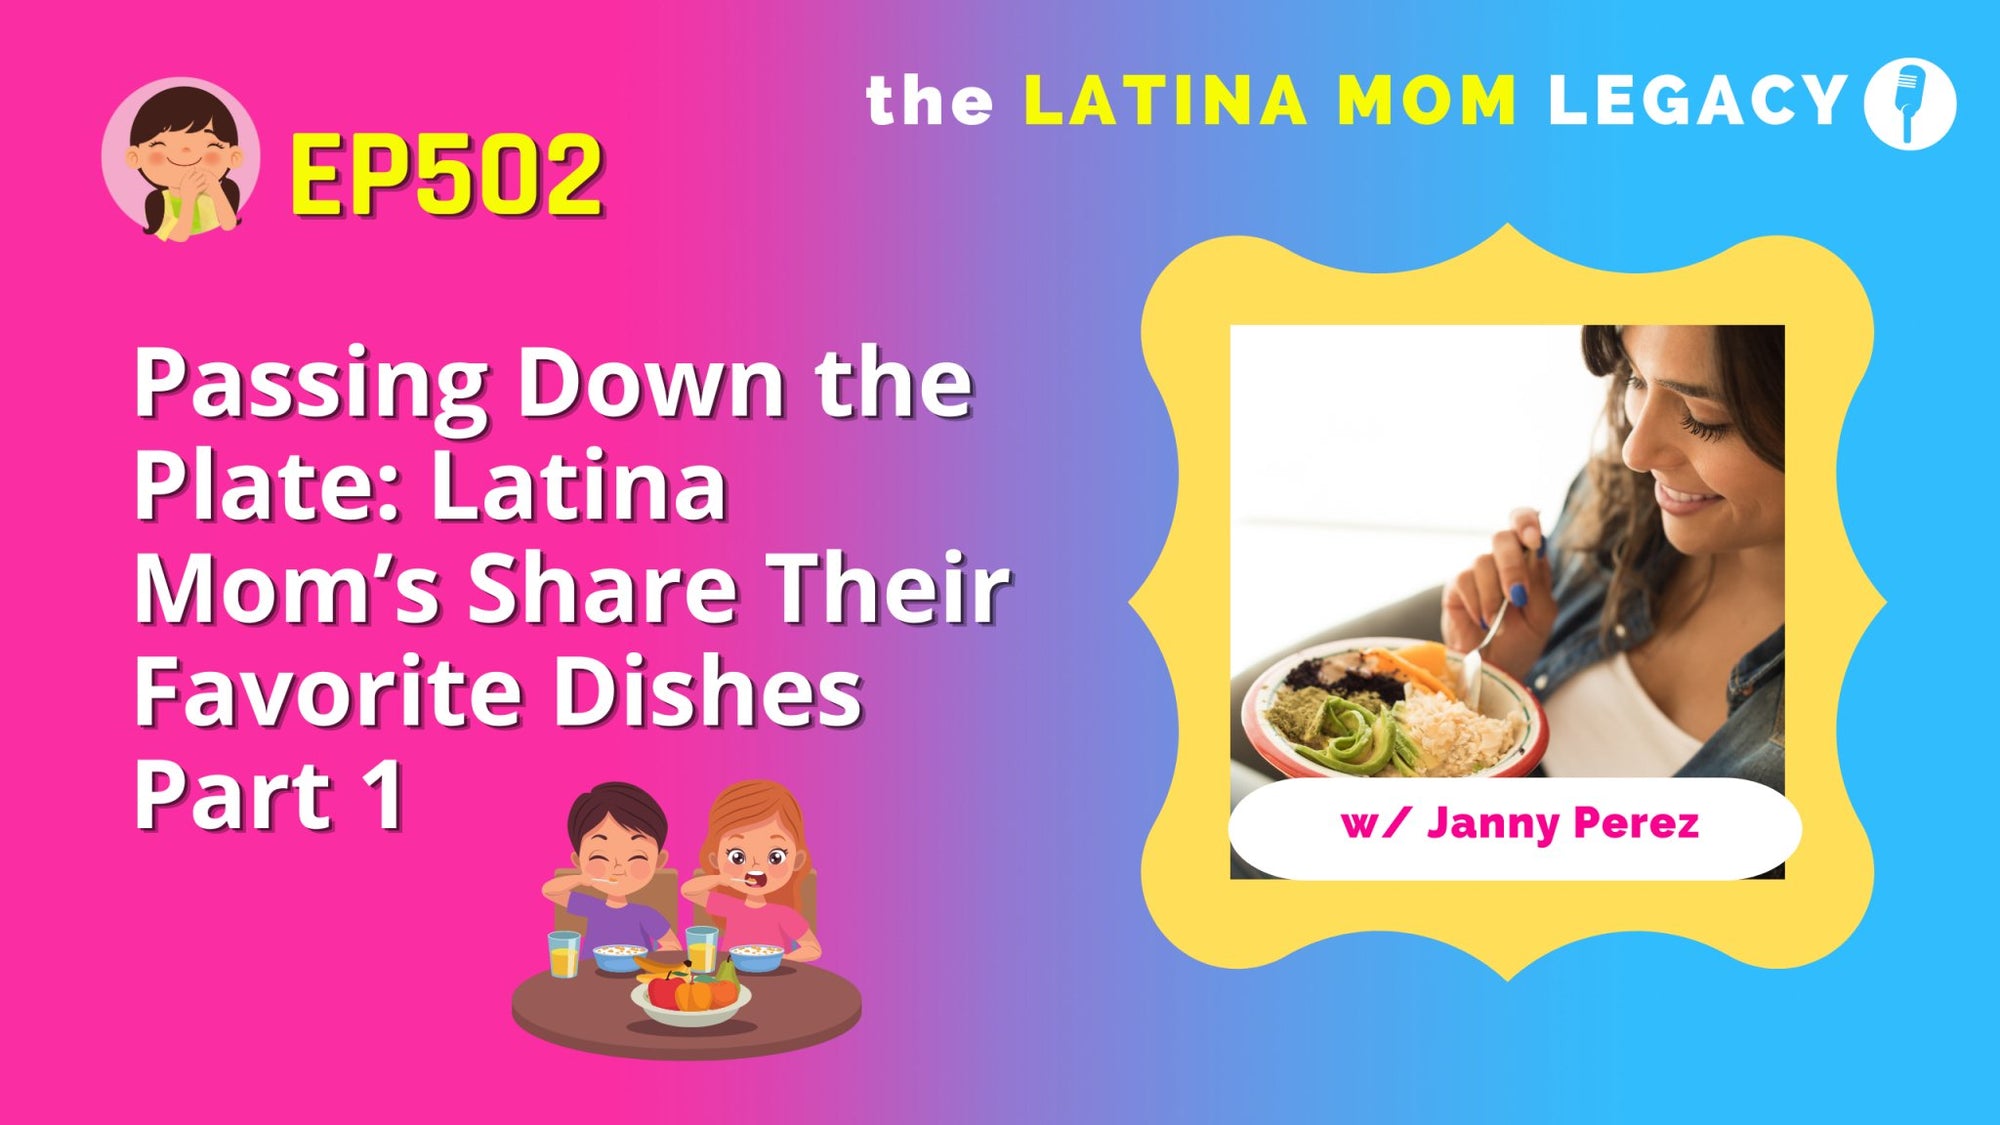 502-Hispanic Heritage Month - Passing Down The Plate: Latina Mom's Share Their Favorite Dishes to Pass Down - Mi LegaSi